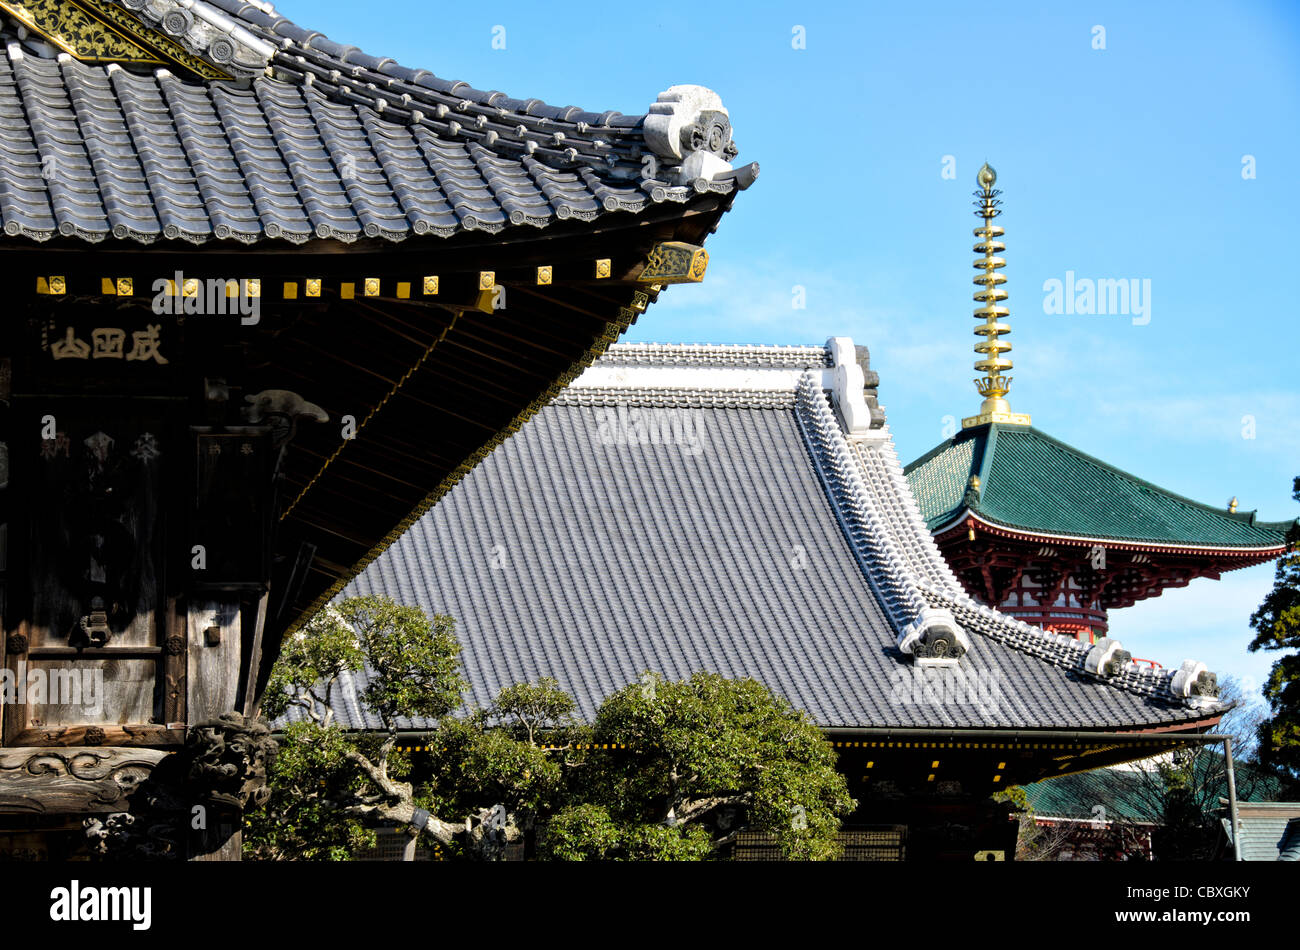 NARITA, Japan - The Narita-san temple, also known as Shinsho-Ji (New Victory Temple), is Shingon Buddhist temple complex, was first established 940 in the Japanese city of Narita, east of Tokyo. Stock Photo